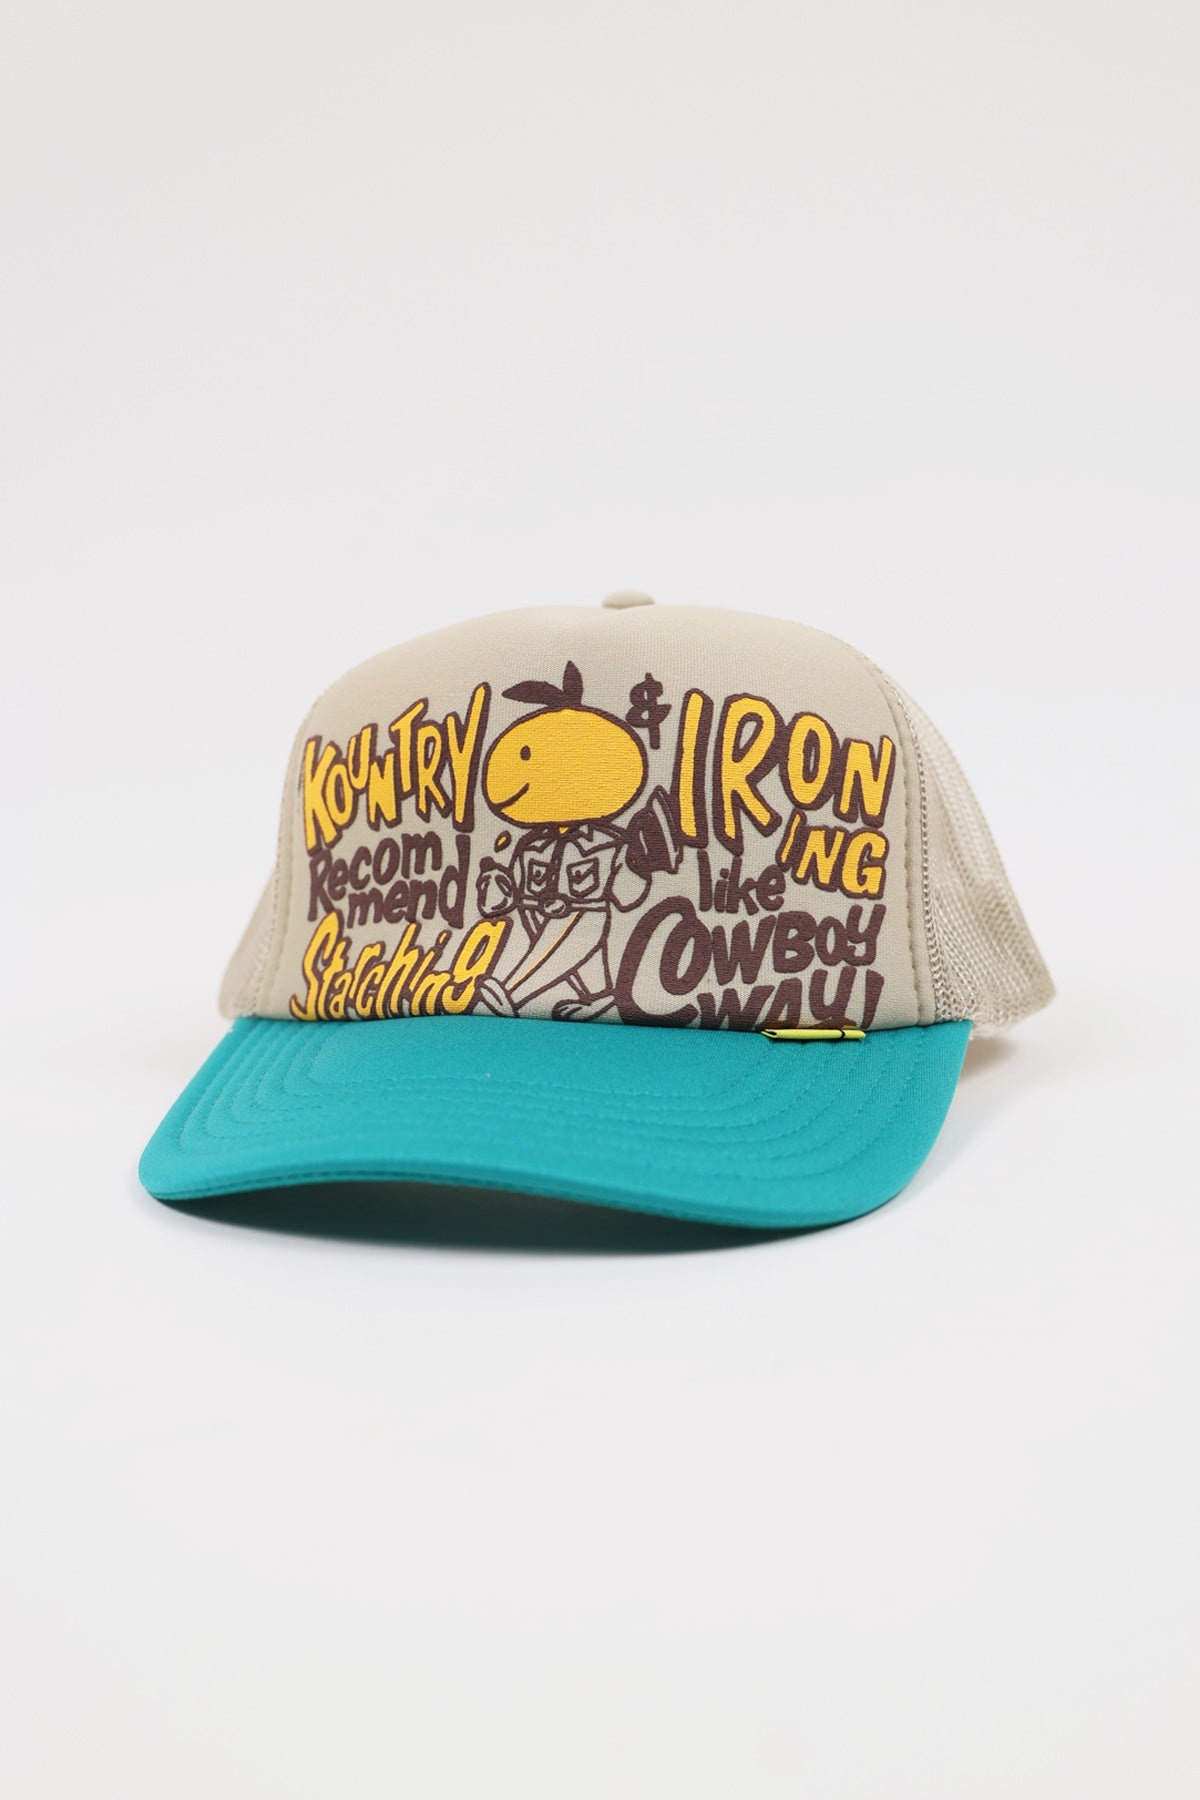 CONEYCOWBOWY TRUCKER CAP - BEIGE X TURQUOISE - 1